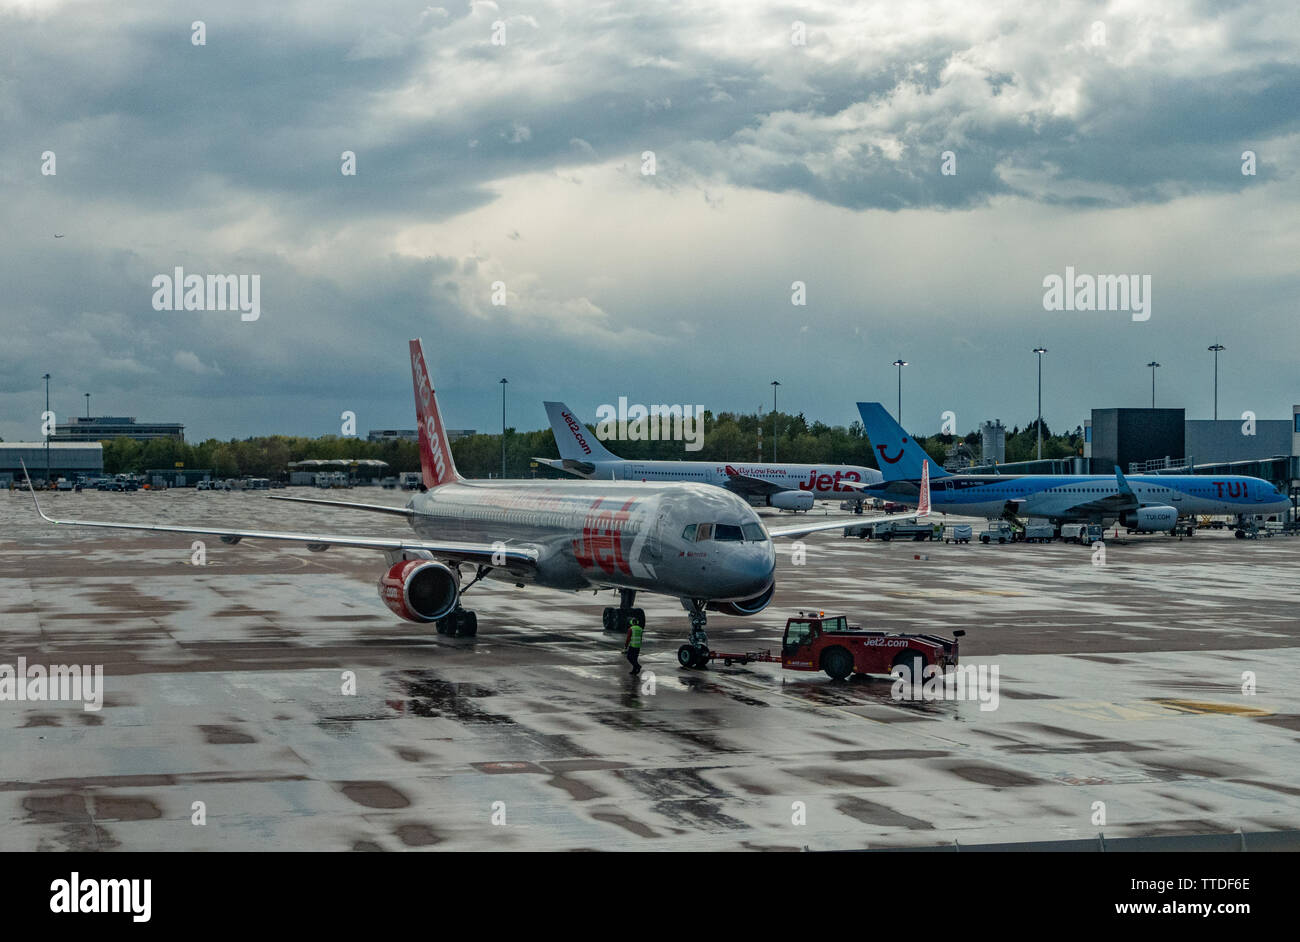 A Jet 2 Boeing 737 waits at the landing gate for boarding passengers Stock Photo